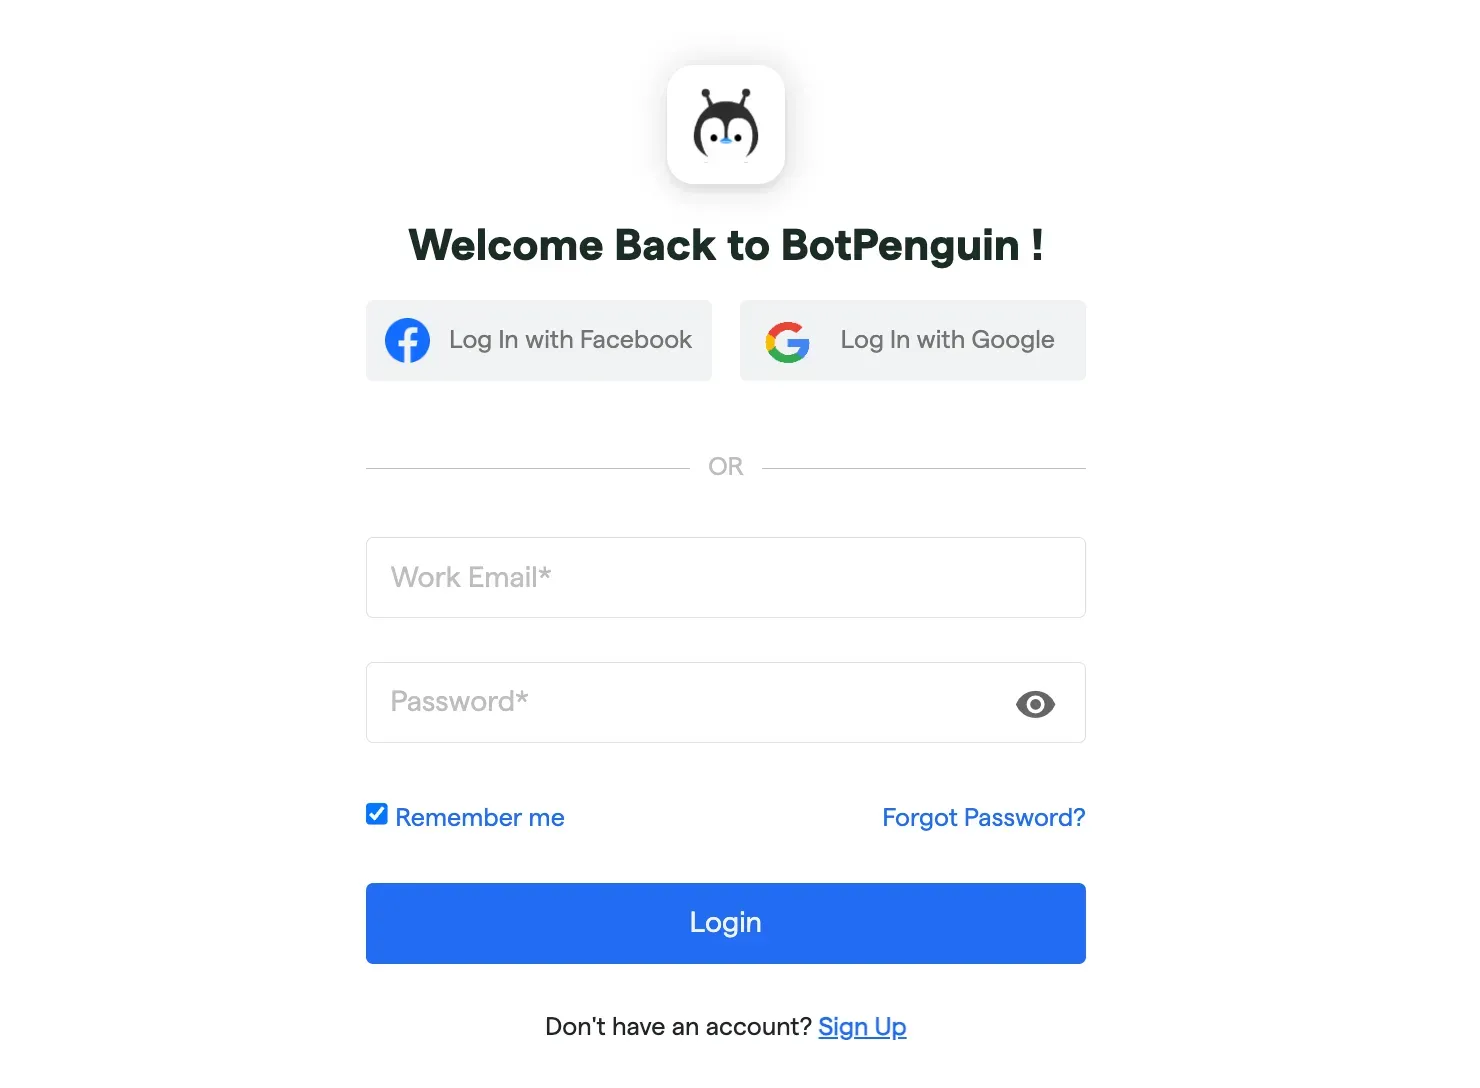 Login to the BotPenguin Account